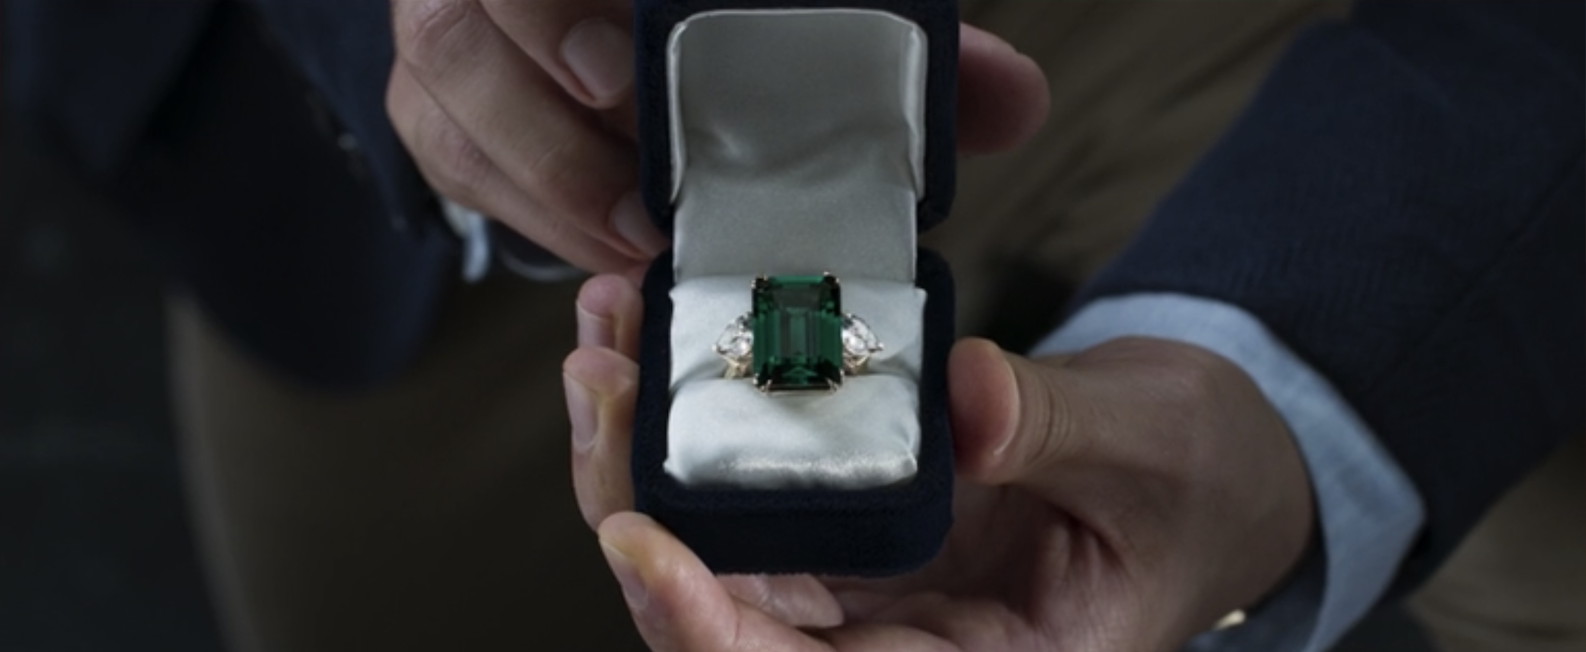 The emerald ring in a box